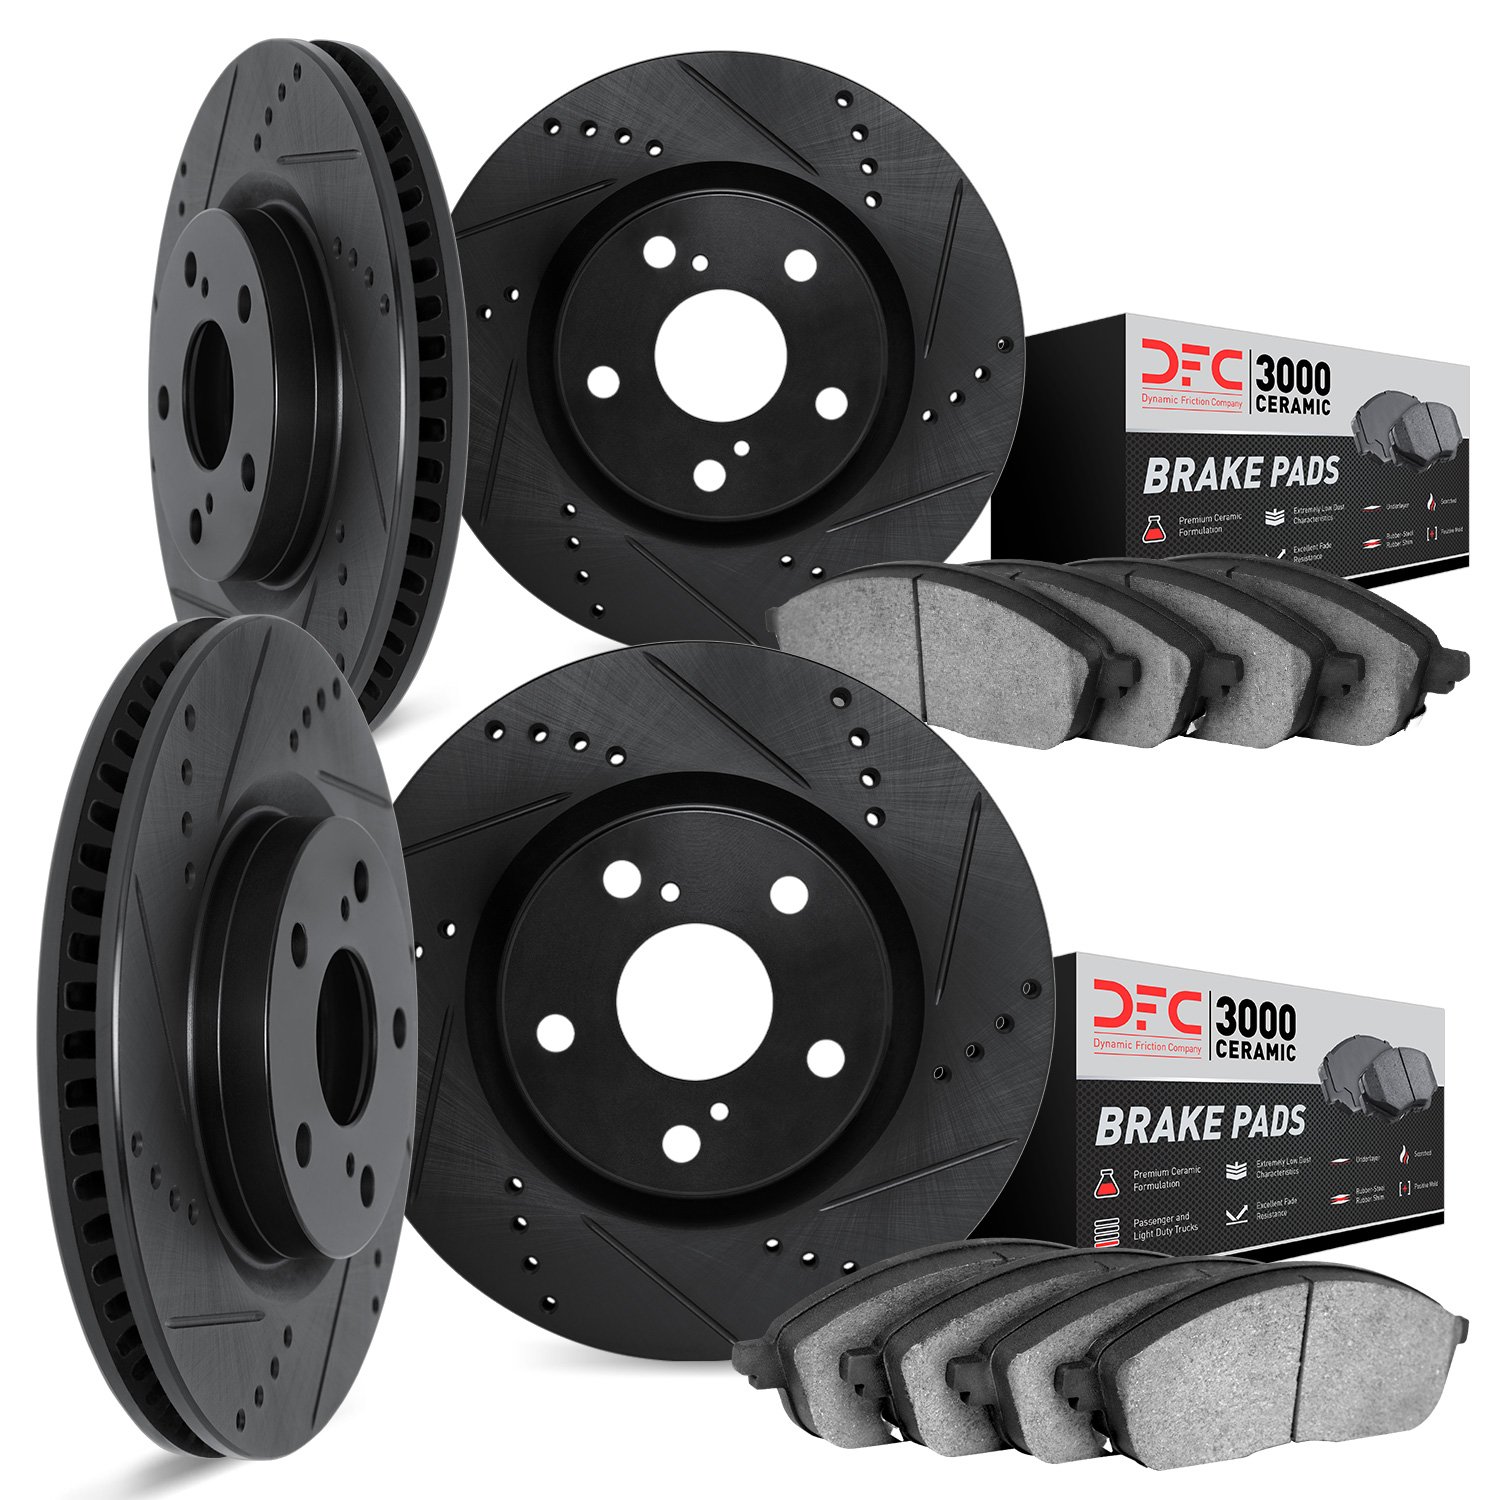 8304-31056 Drilled/Slotted Brake Rotors with 3000-Series Ceramic Brake Pads Kit [Black], 2006-2006 BMW, Position: Front and Rear